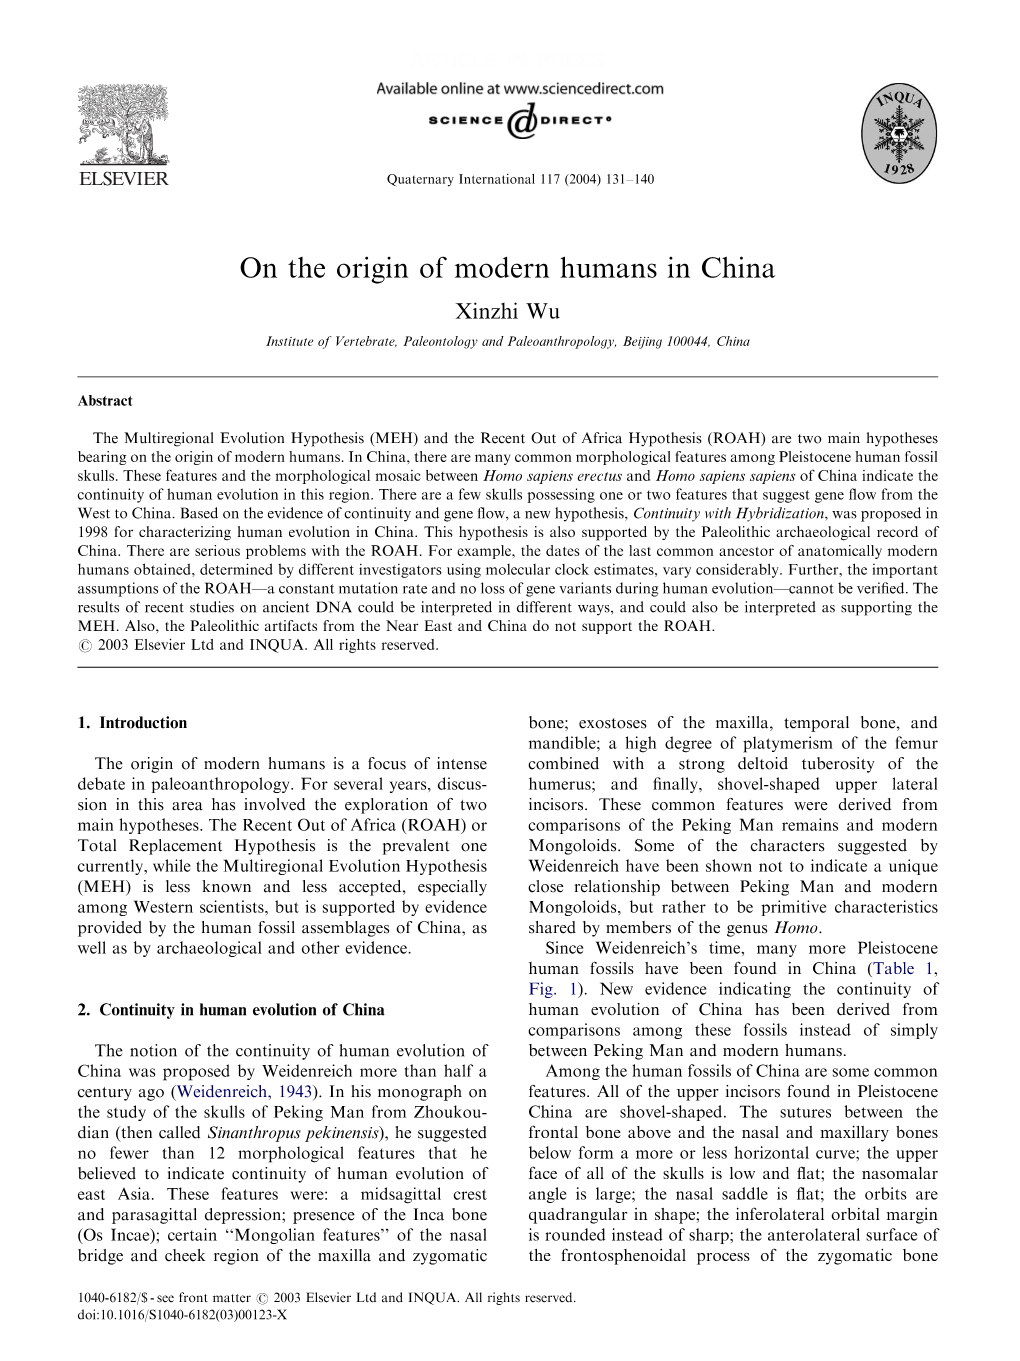 On the Origin of Modern Humans in China Xinzhi Wu Institute of Vertebrate, Paleontology and Paleoanthropology, Beijing 100044, China